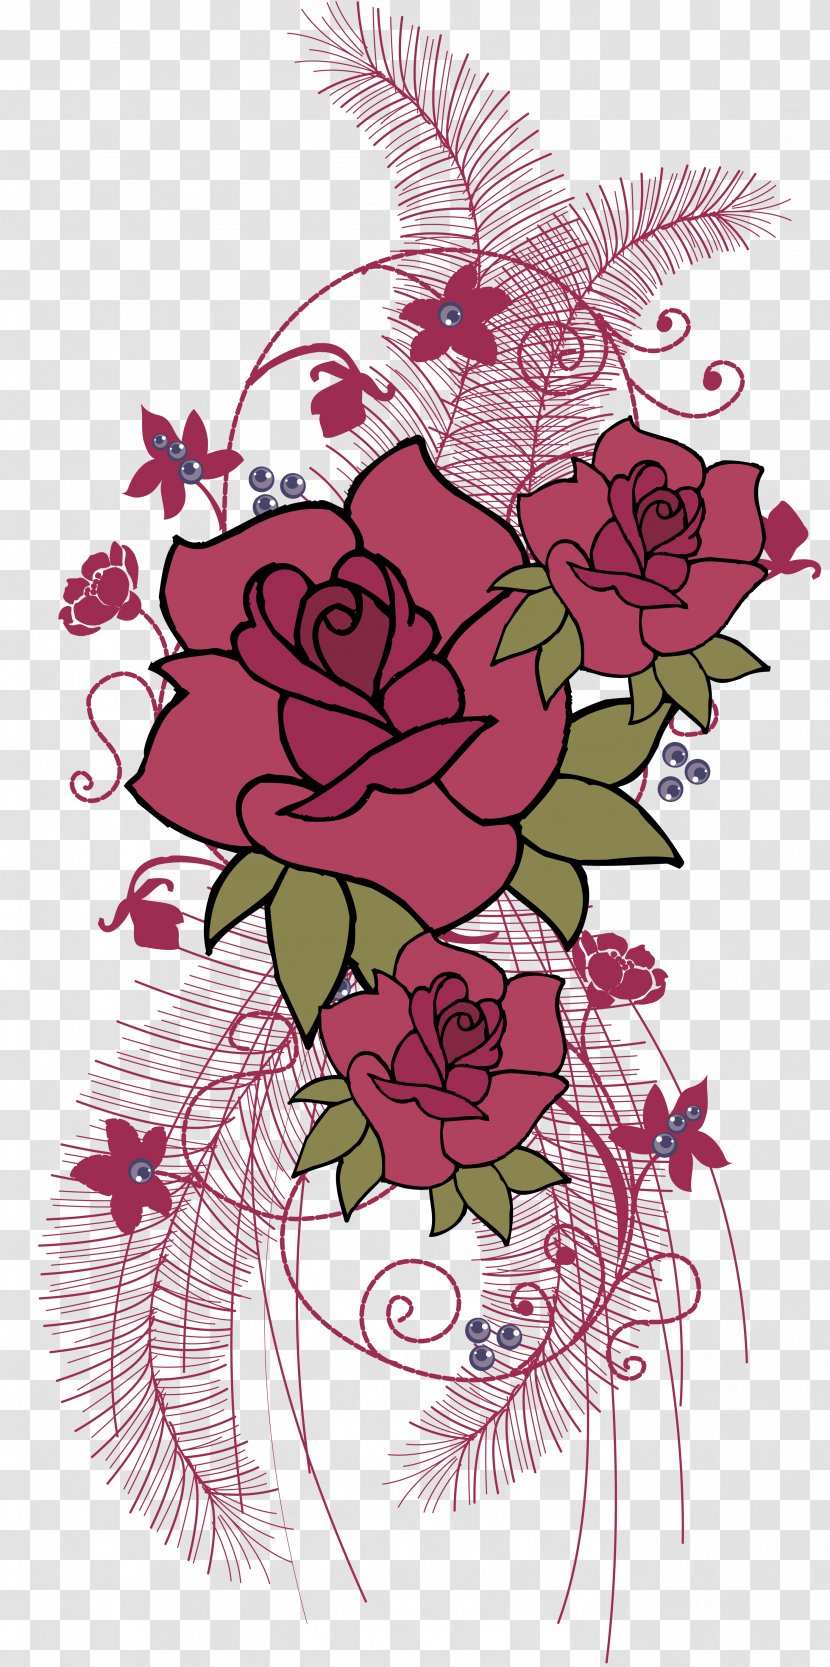 Rose Flower - Rosa Centifolia - Hand-painted Flowers Tattoo Transparent PNG